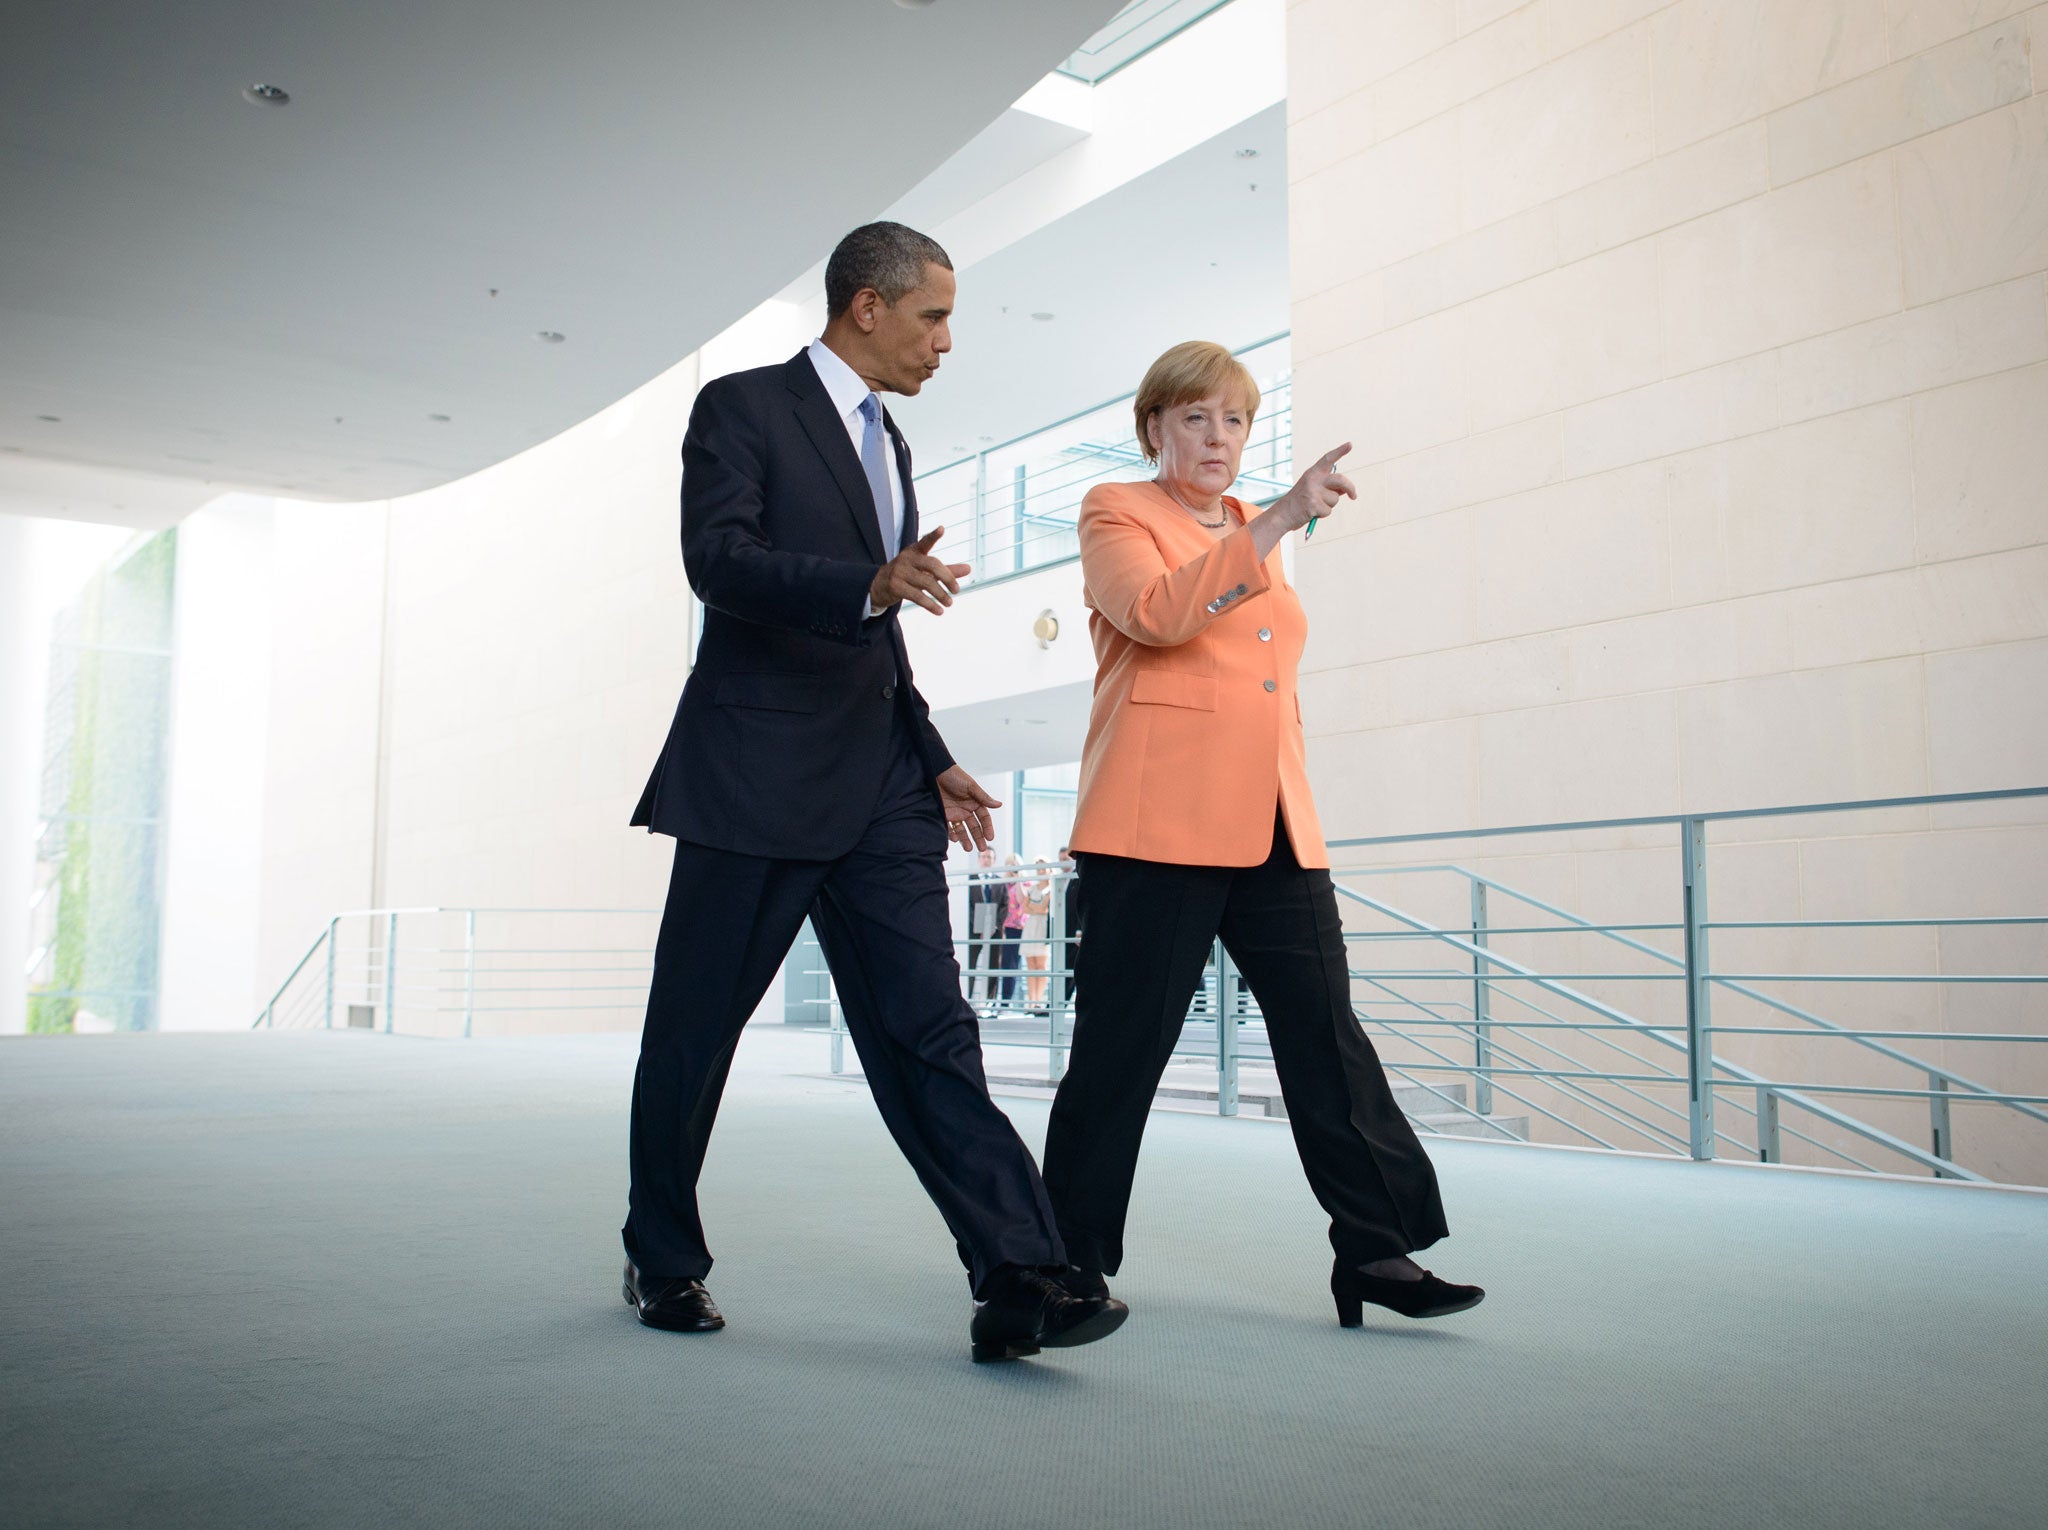 German Chancellor Anegela Merkel (R) and U.S. President Barack Obama (L) arrived to a press conference on June 19, 2013 in Berlin, Germany.